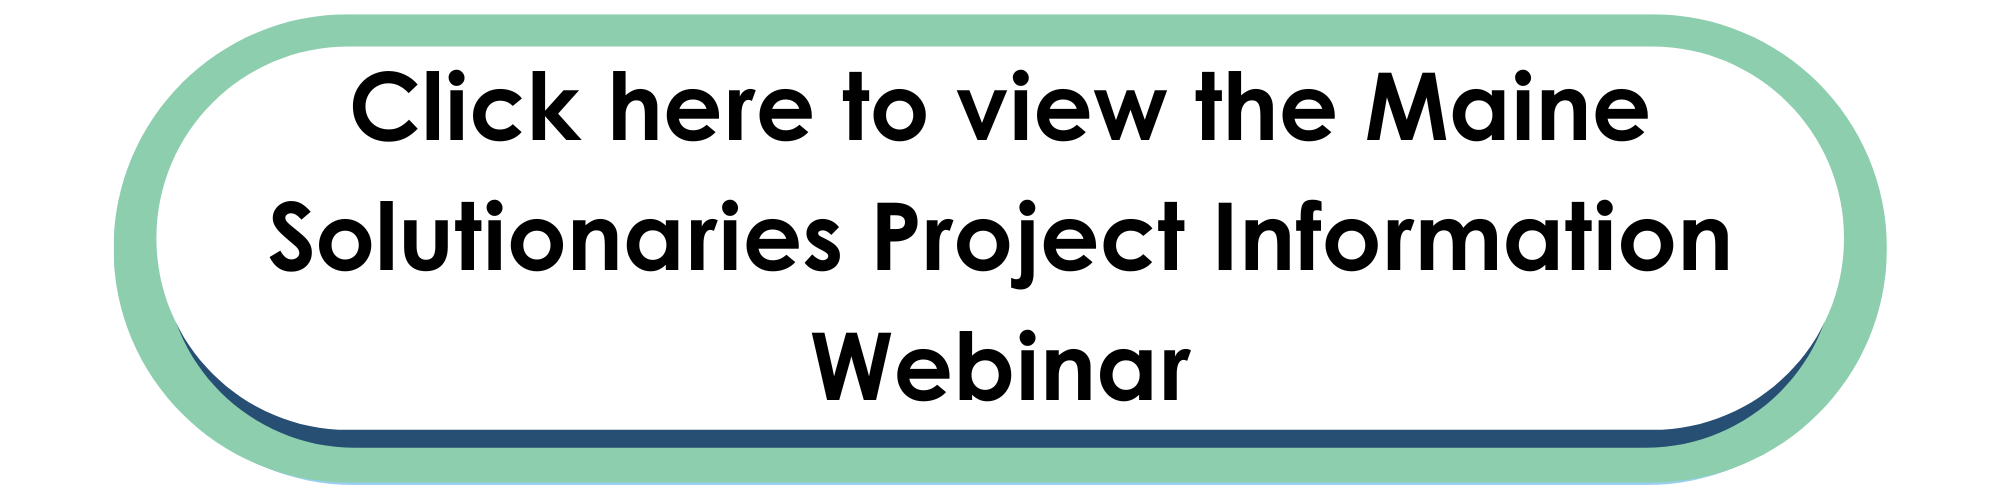 Click here to view the Maine Solutionaries Project Webinar